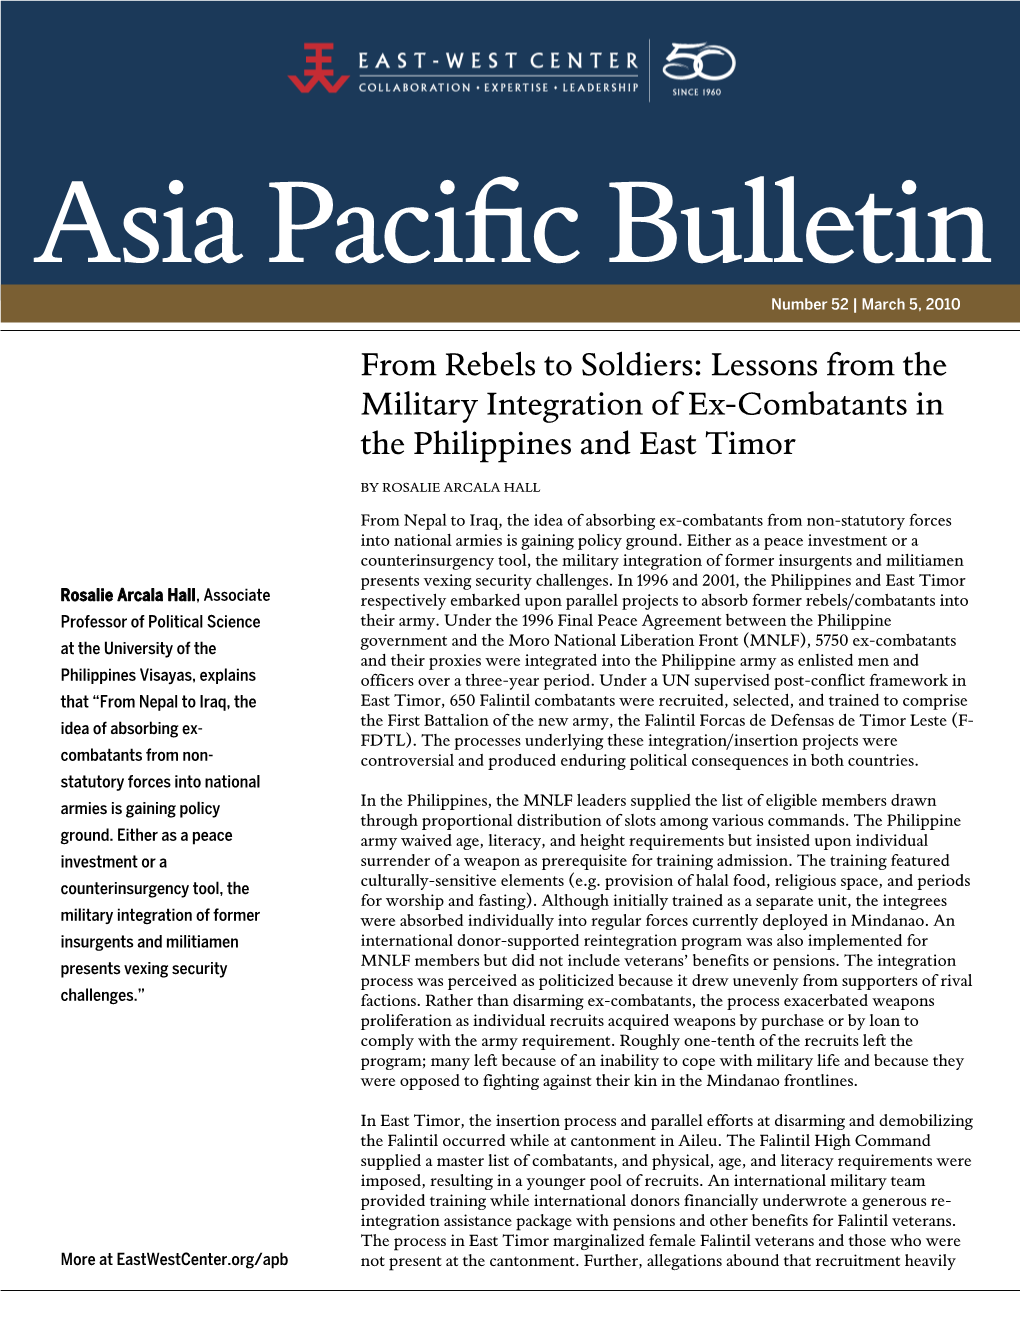 Asia Pacific Bulletin | March 5, 2010 Favored Those from the Eastern Commands